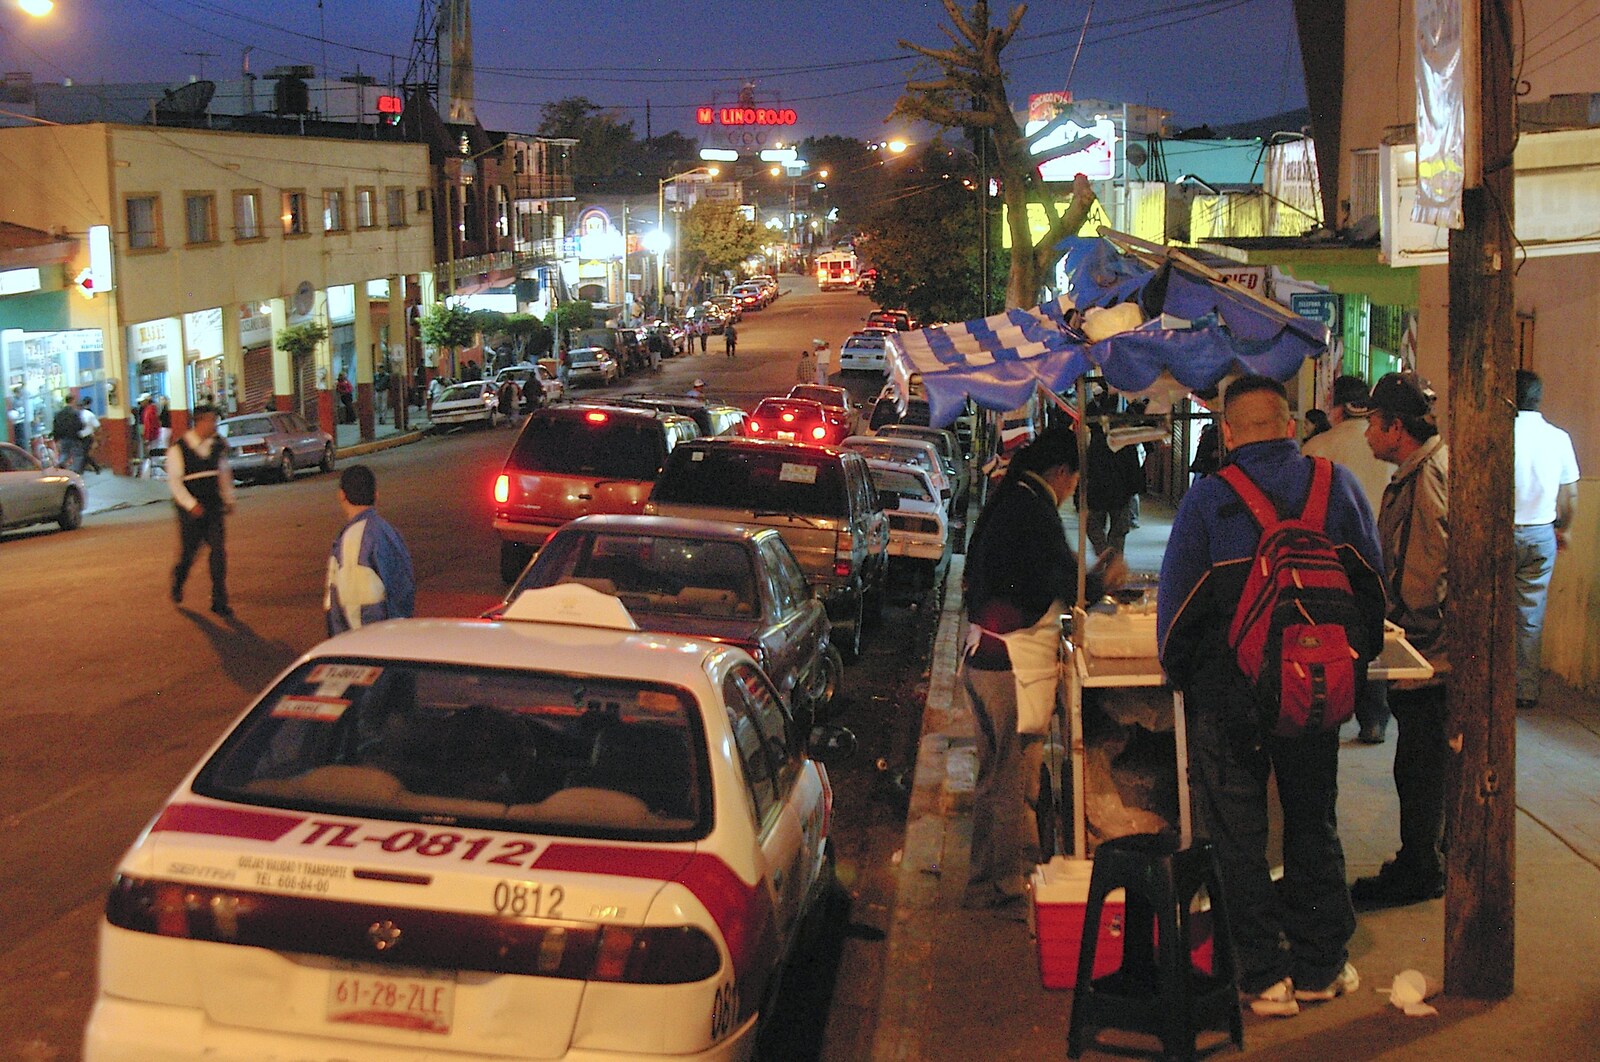 A busy night for taxis from A Trip to Tijuana, Mexico - 25th March 2006